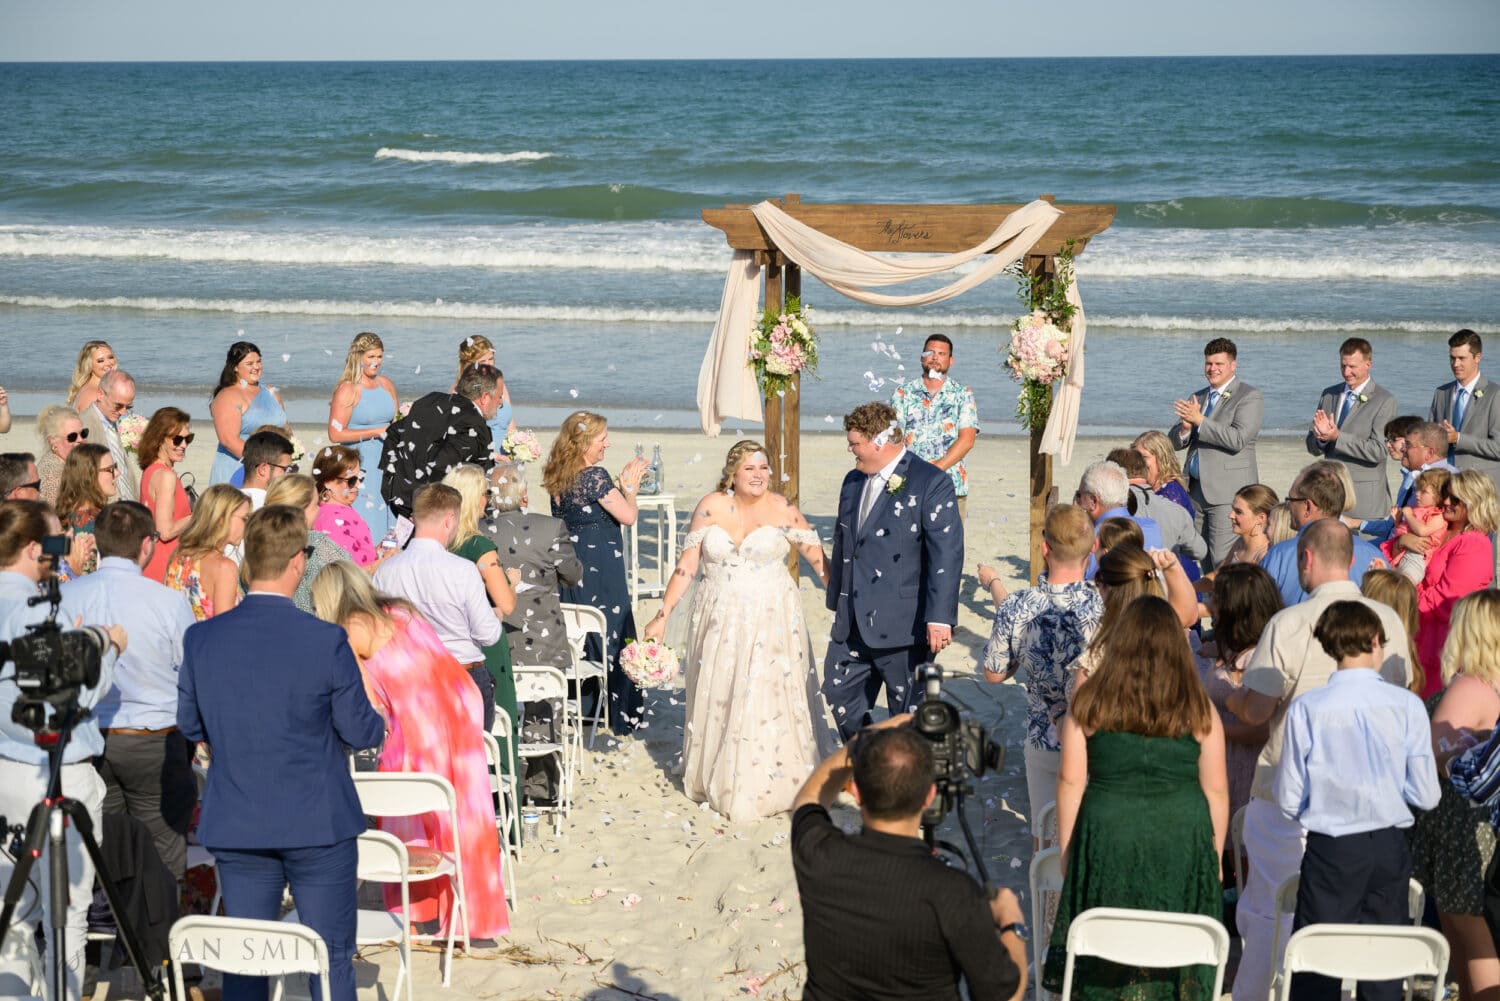 Throwing petals after the ceremony - Pawleys Island Beach House